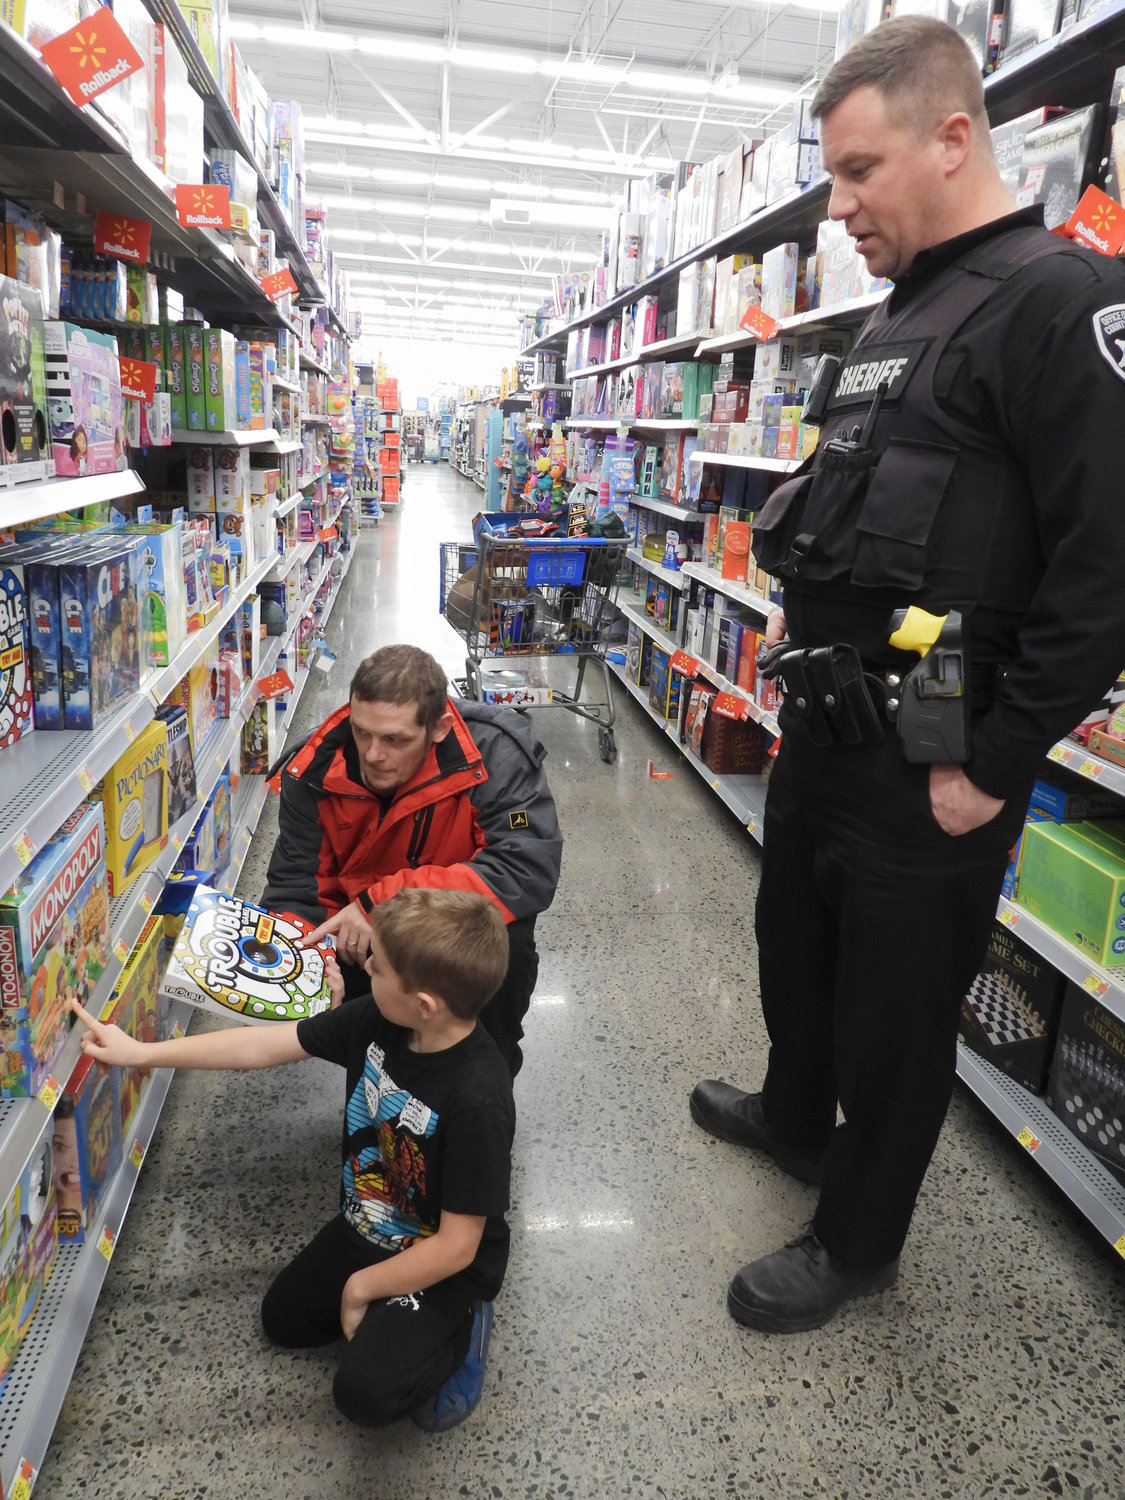 Seth Wheeler Jr., of Cazenovia, shops with his father Seth Wheeler Sr. and Deputy Sheriff Steve Markle during the Madison County Shop with a Sheriff event on Saturday, Dec. 3